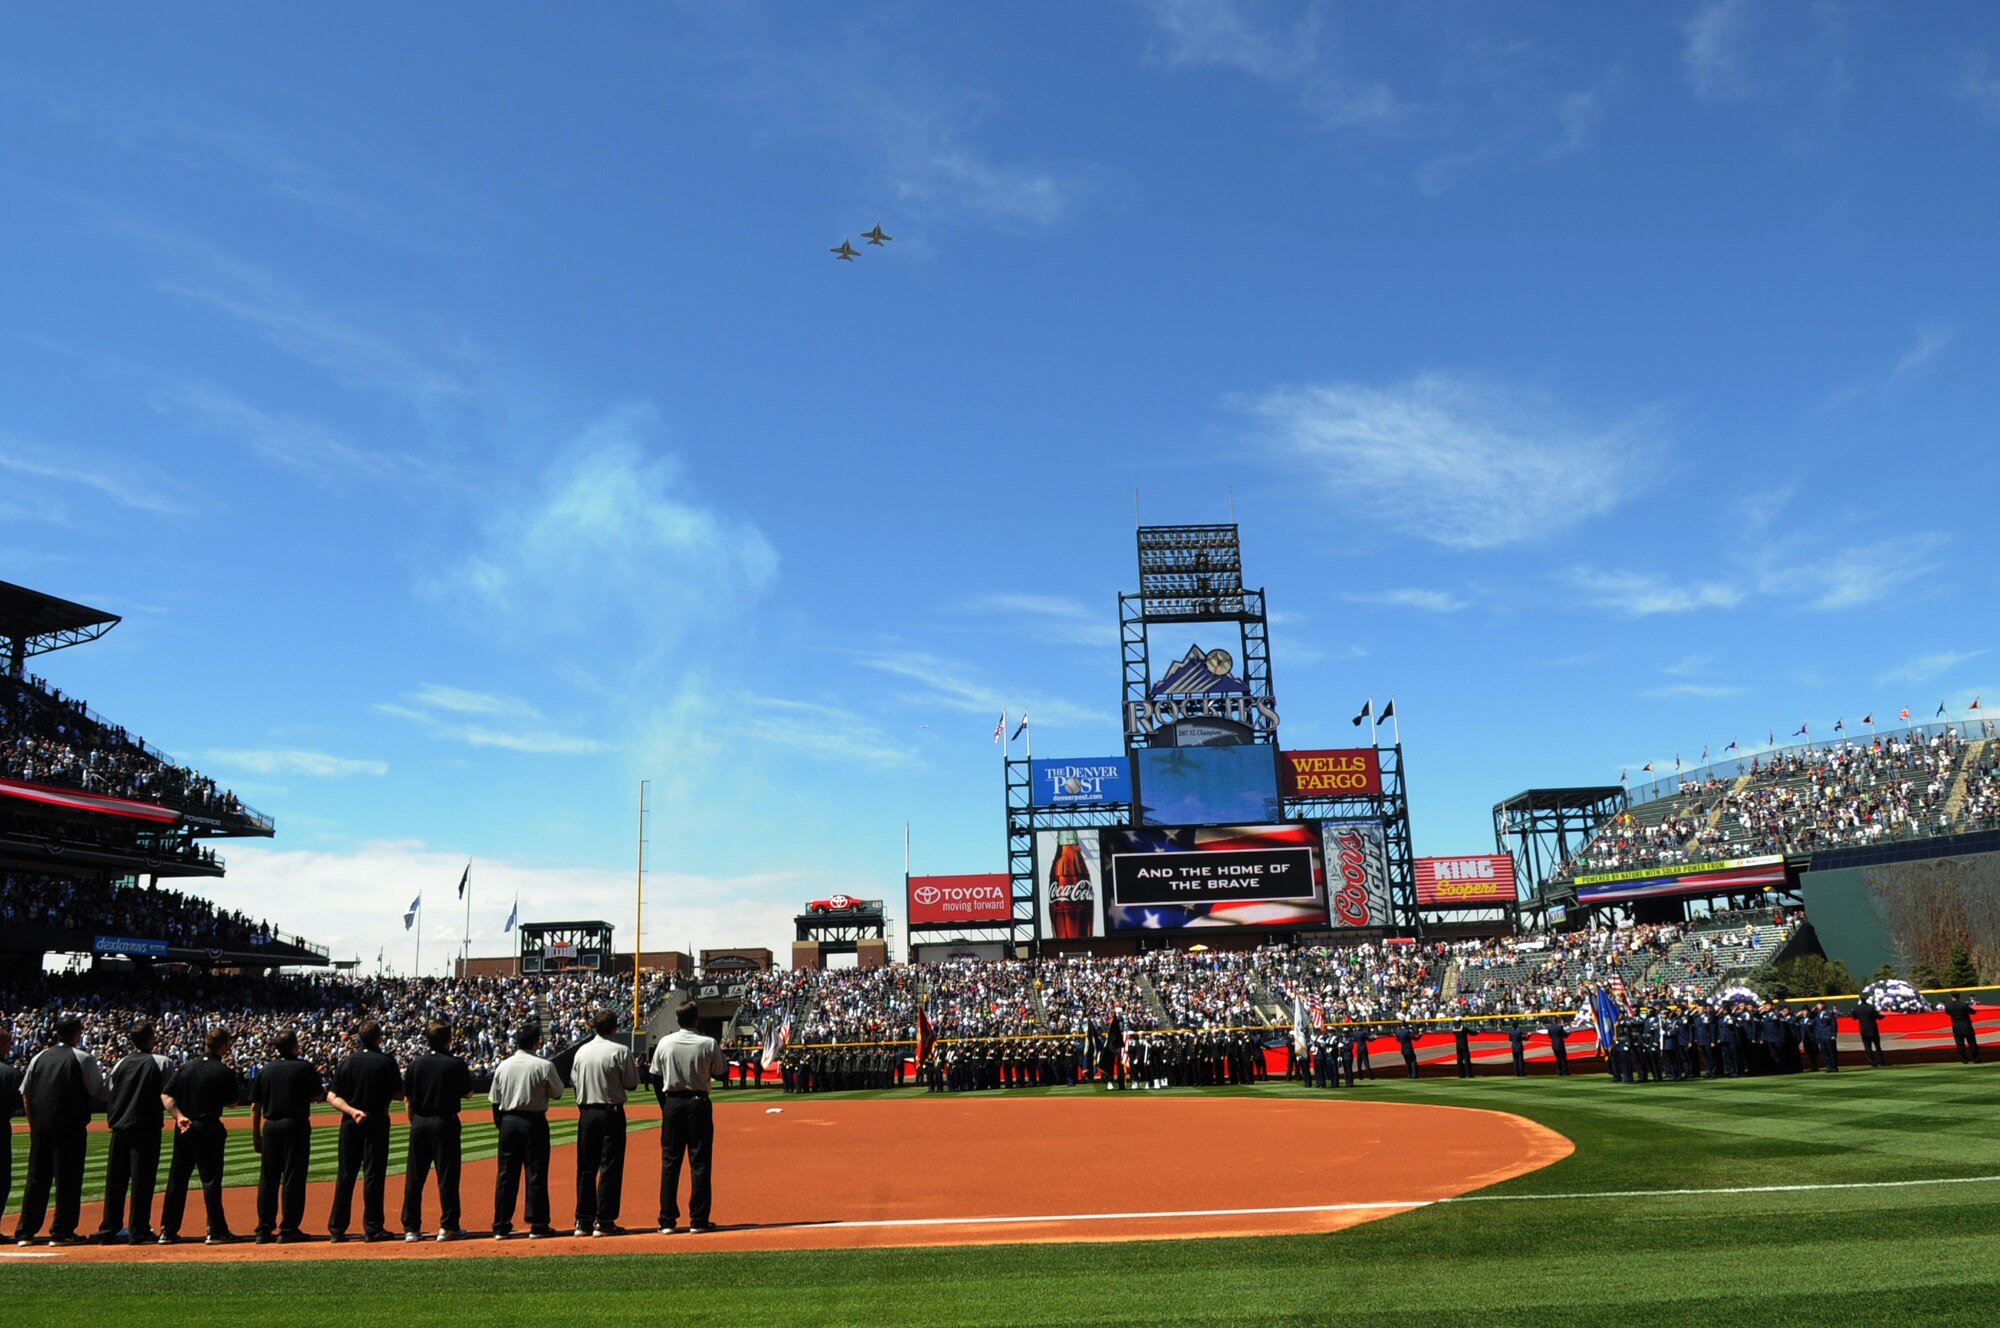 DENVER, Colo. -- A crowd of 45,509 people watch two Navy EA-18G Growlers fly over Coors Field during Colorado Rockies Opening Day April 9. The Rockies won the opener against the San Diego Padres 7-0. (U.S. Air Force photo by Airman 1st Class Marcy Glass)